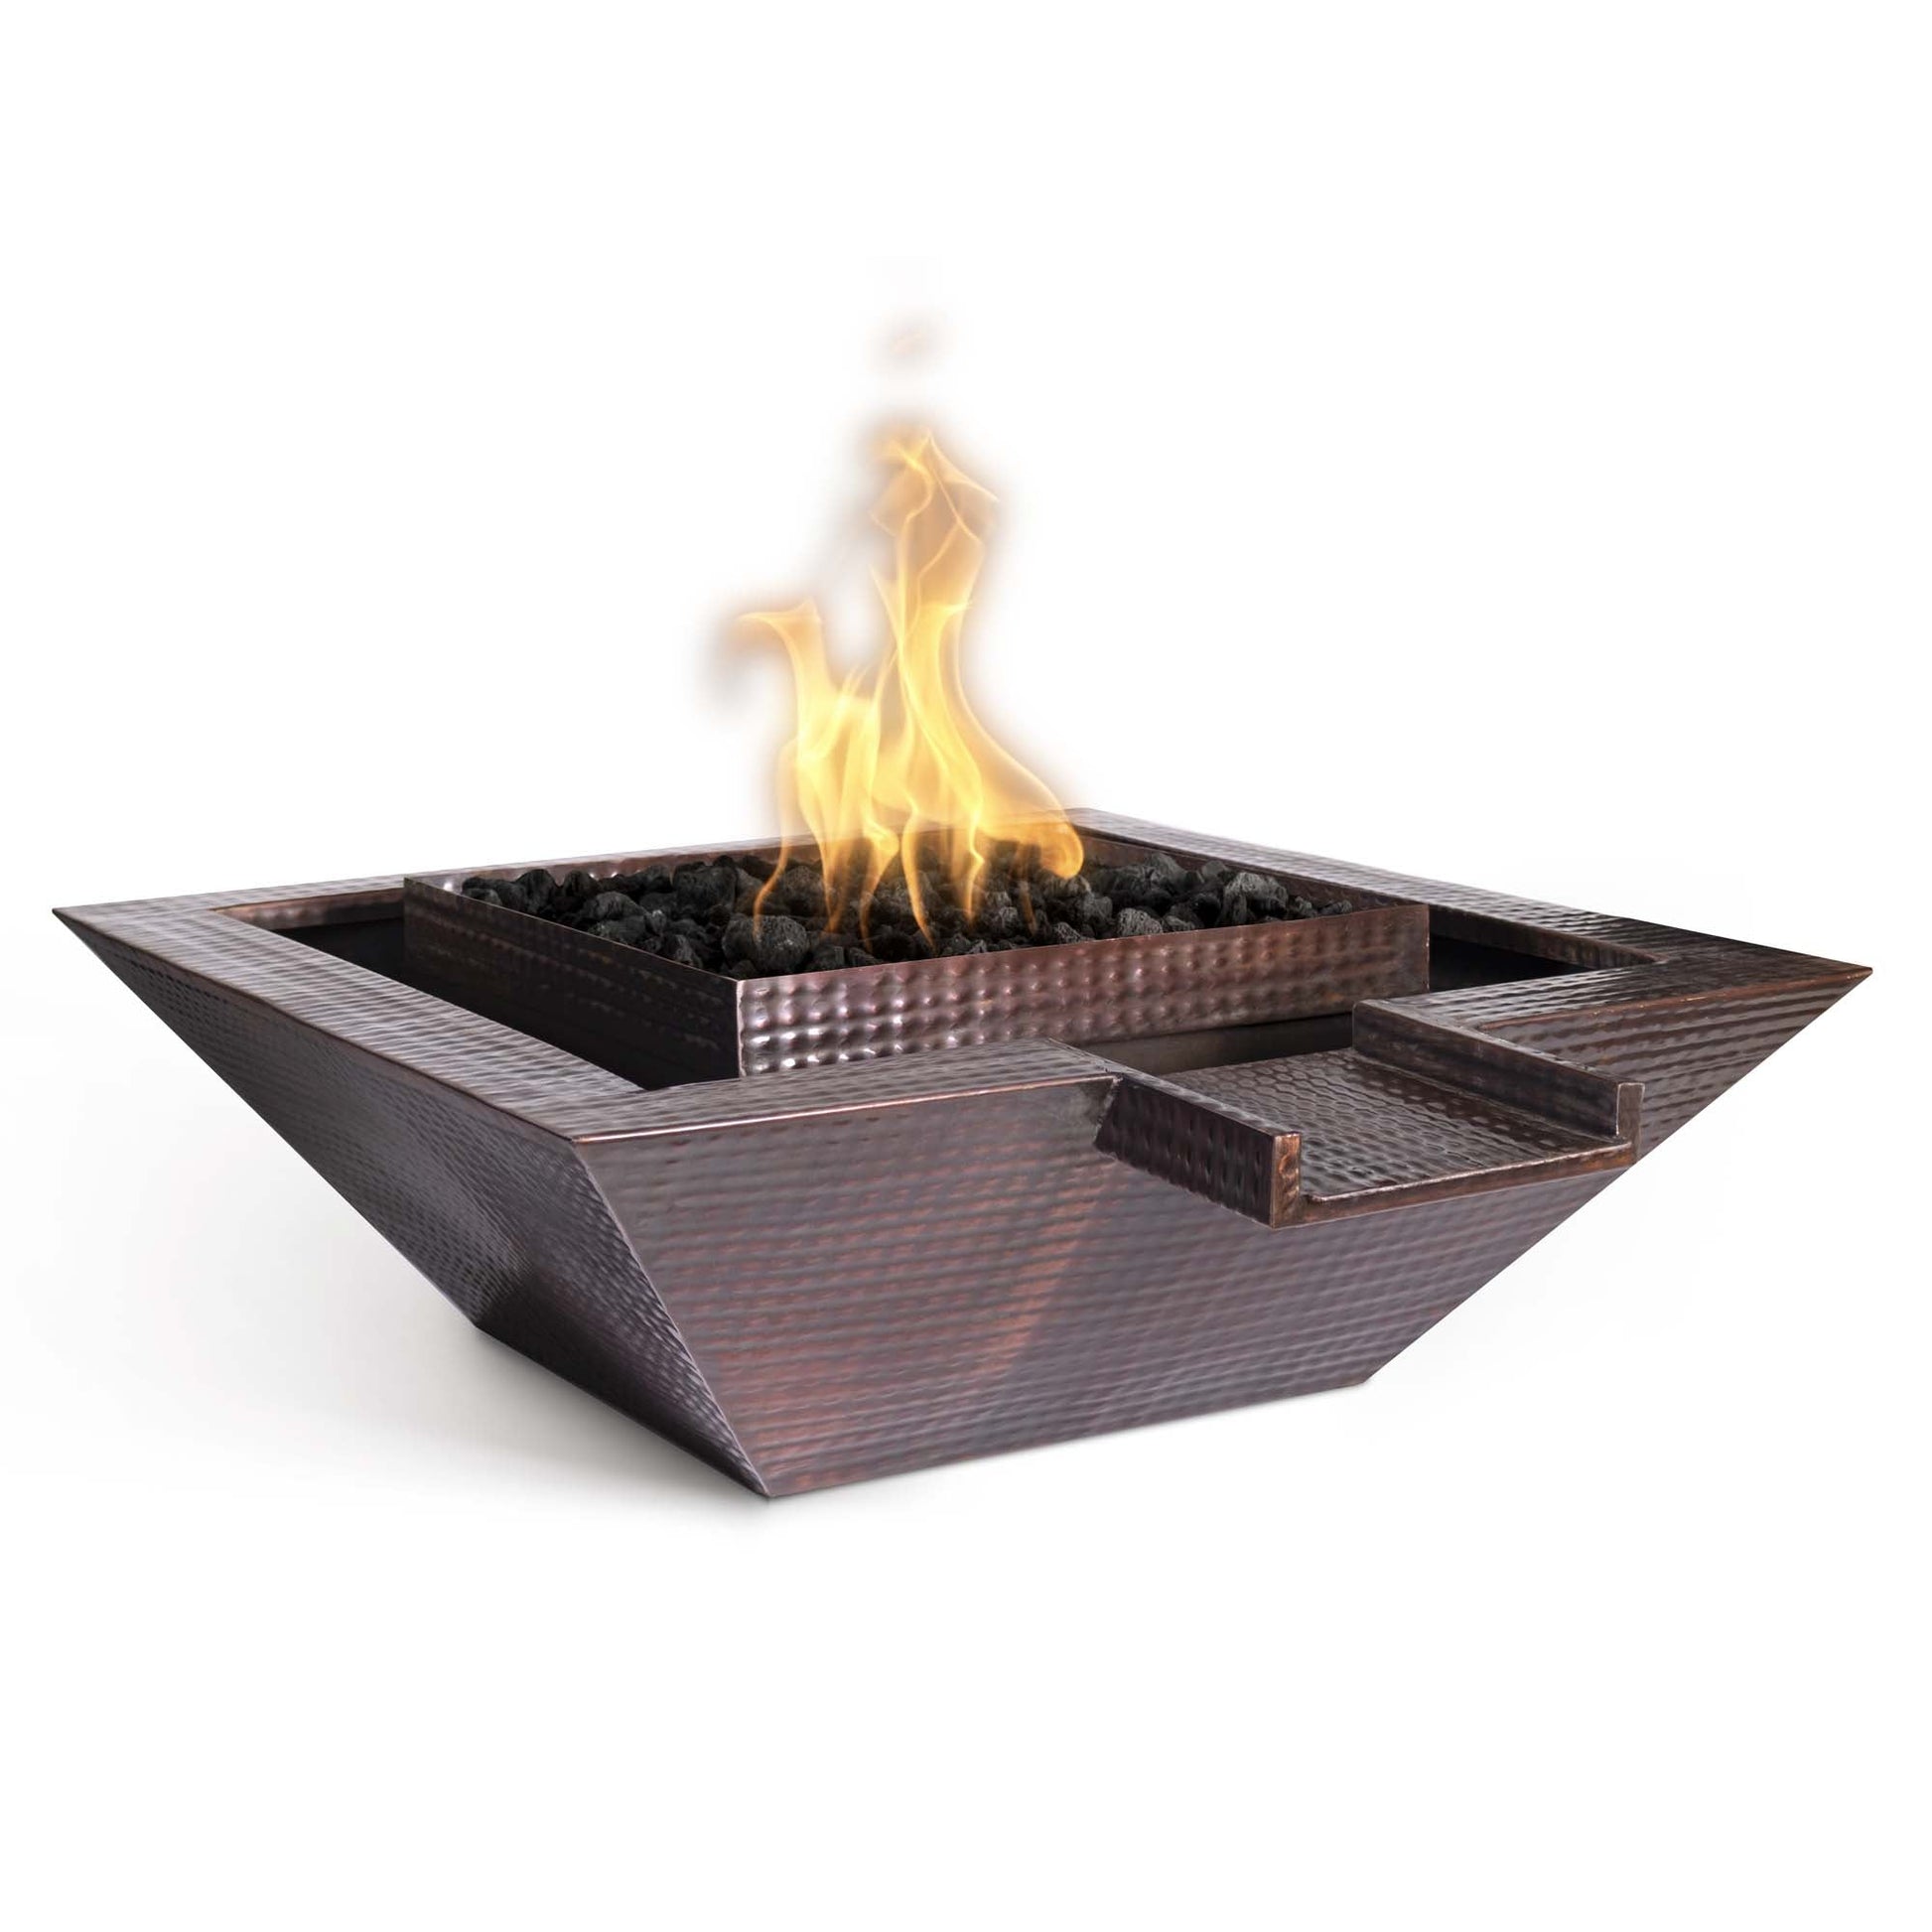 36" Maya Hammered Copper Fire & Water Bowl - Gravity Spill - 12V Electronic Ignition-Novel Home